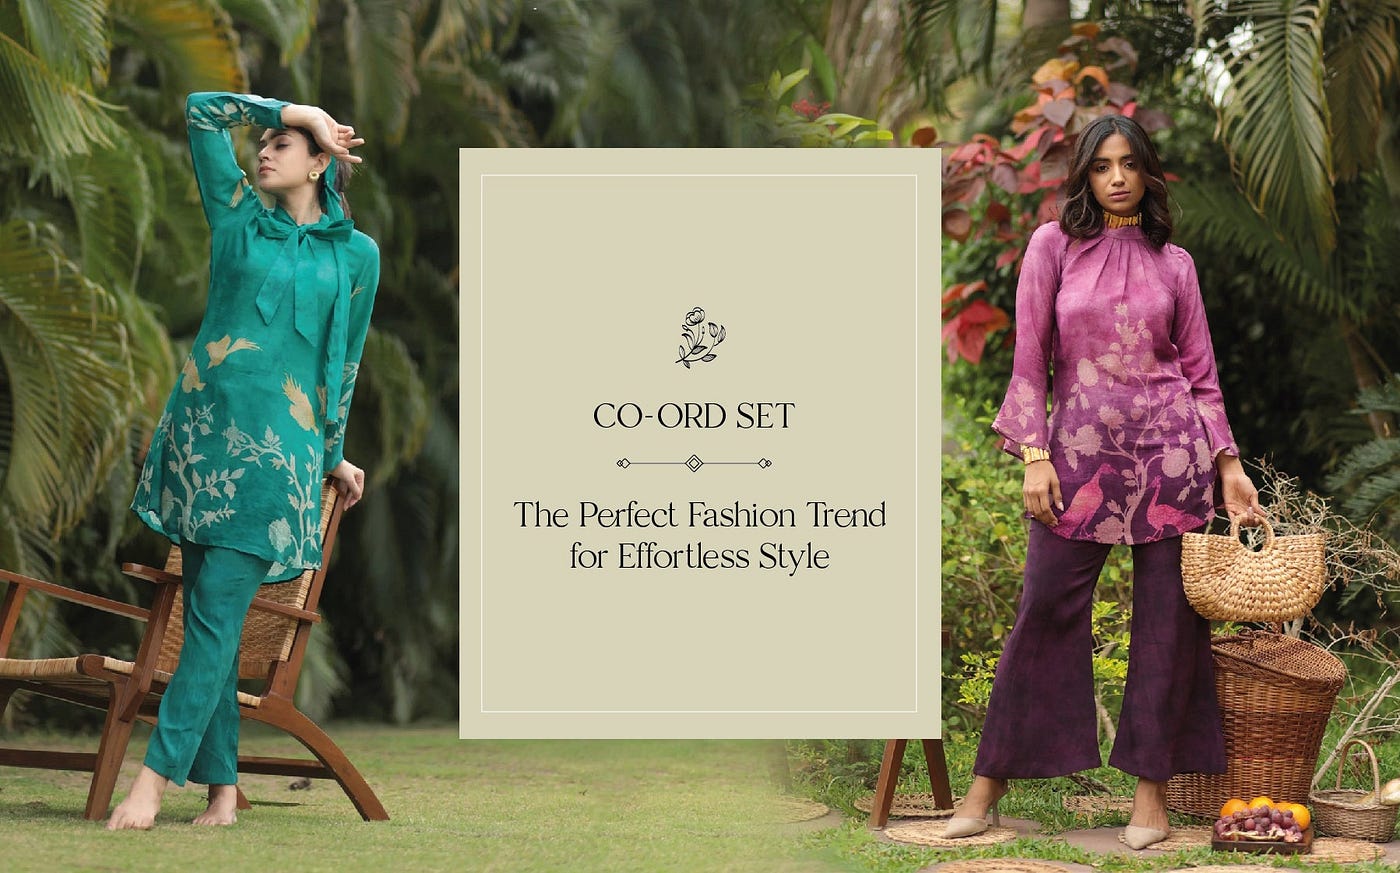 Co-ord Set: Elevating Your Style with Effortless Fashion